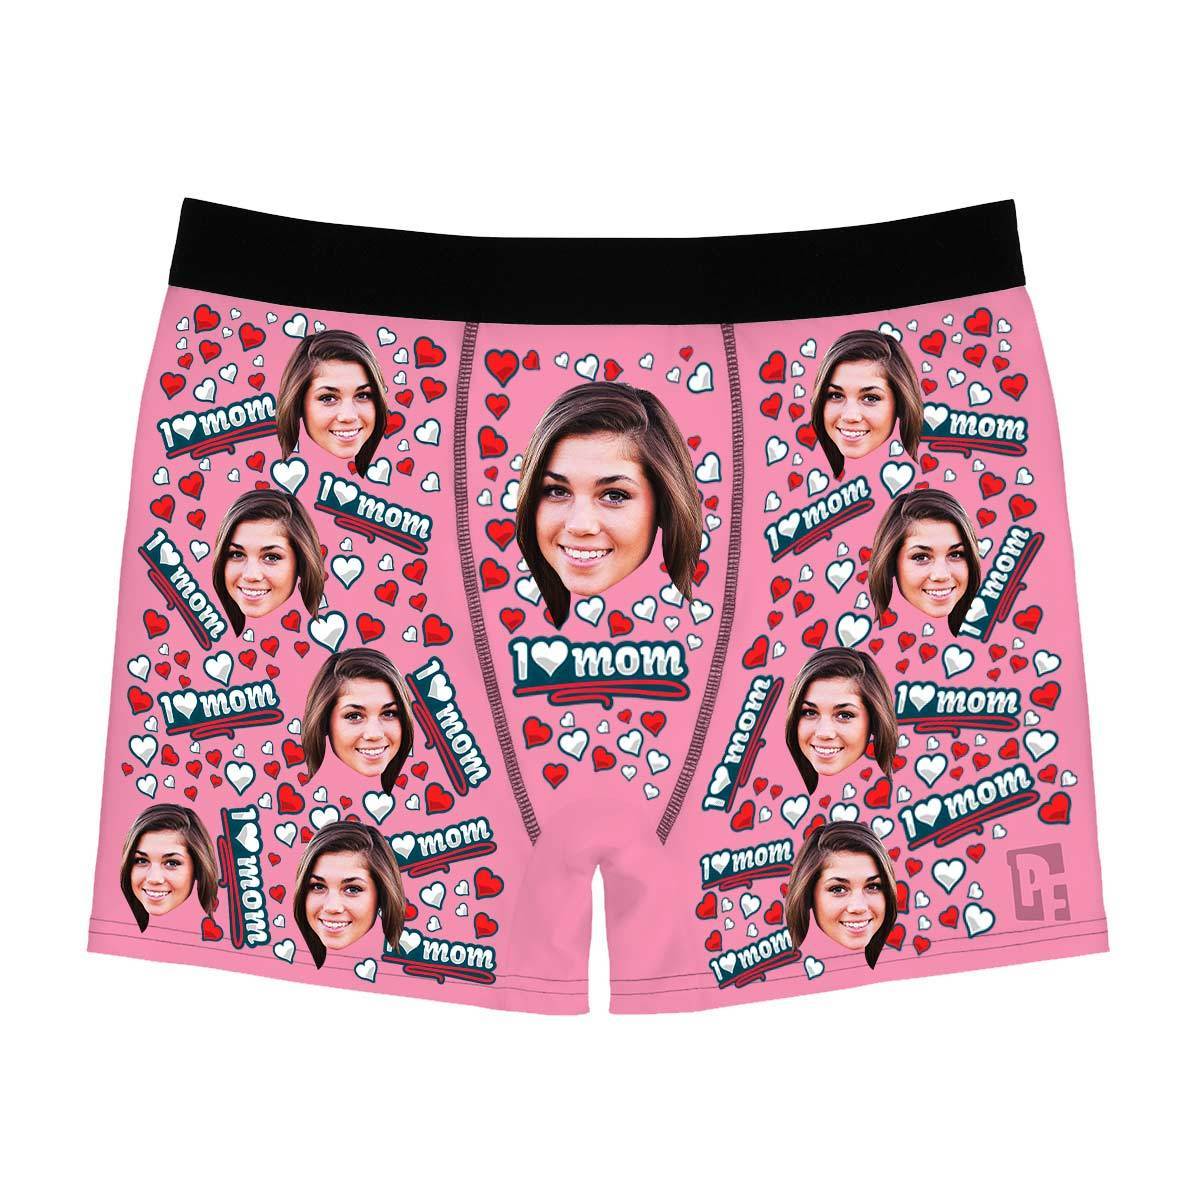 Pink Love mom men's boxer briefs personalized with photo printed on them